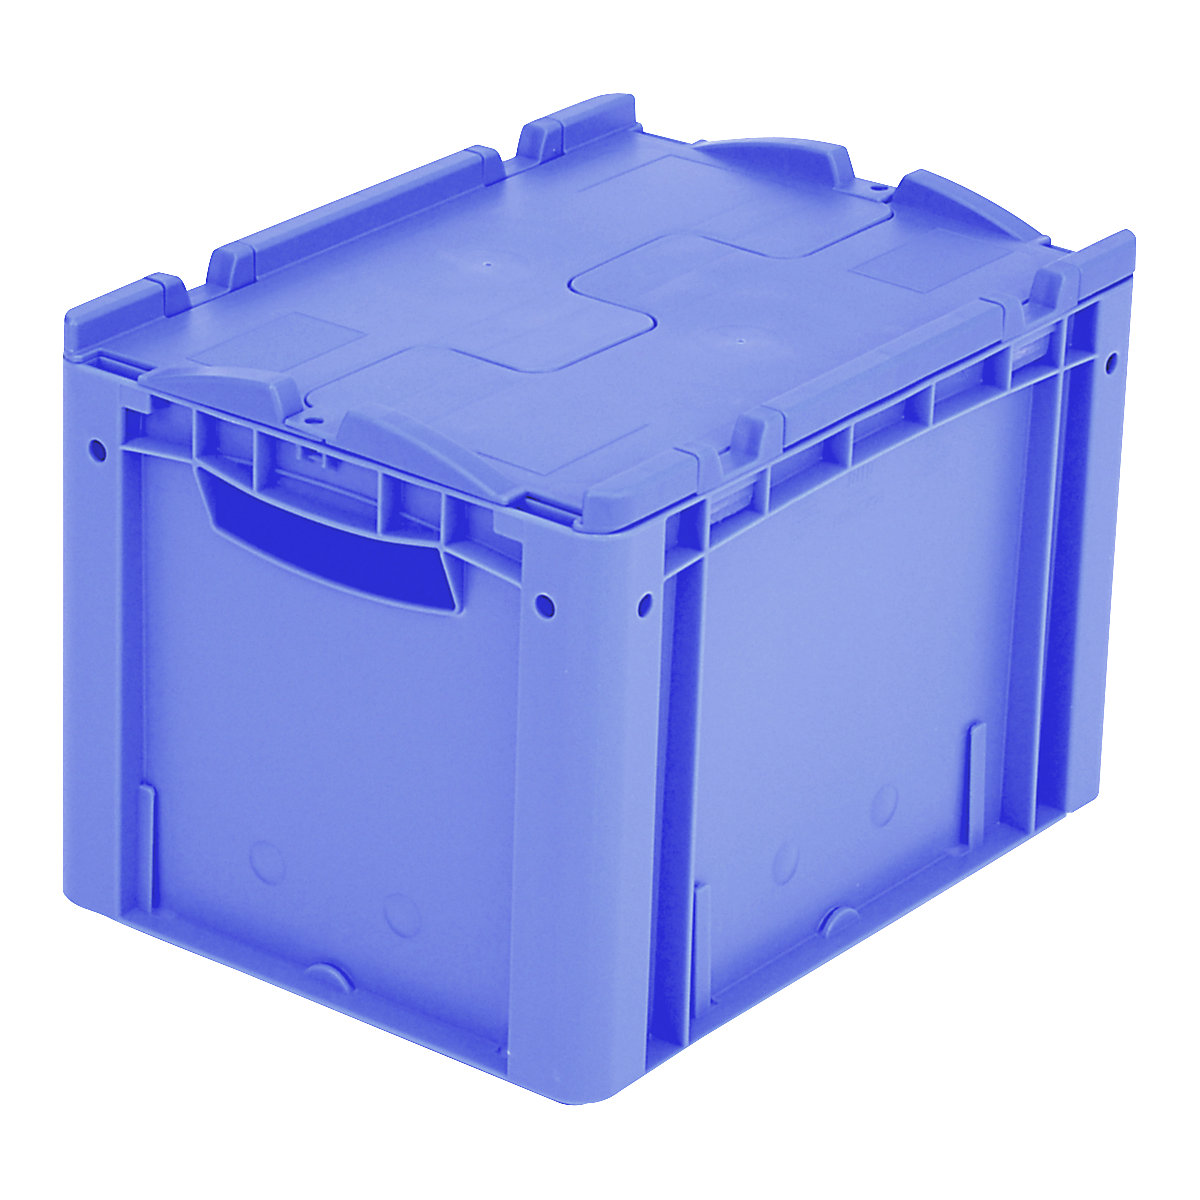 XL Euro stacking container – BITO, with 2-section hinged lid, LxWxH 400 x 300 x 288 mm-16